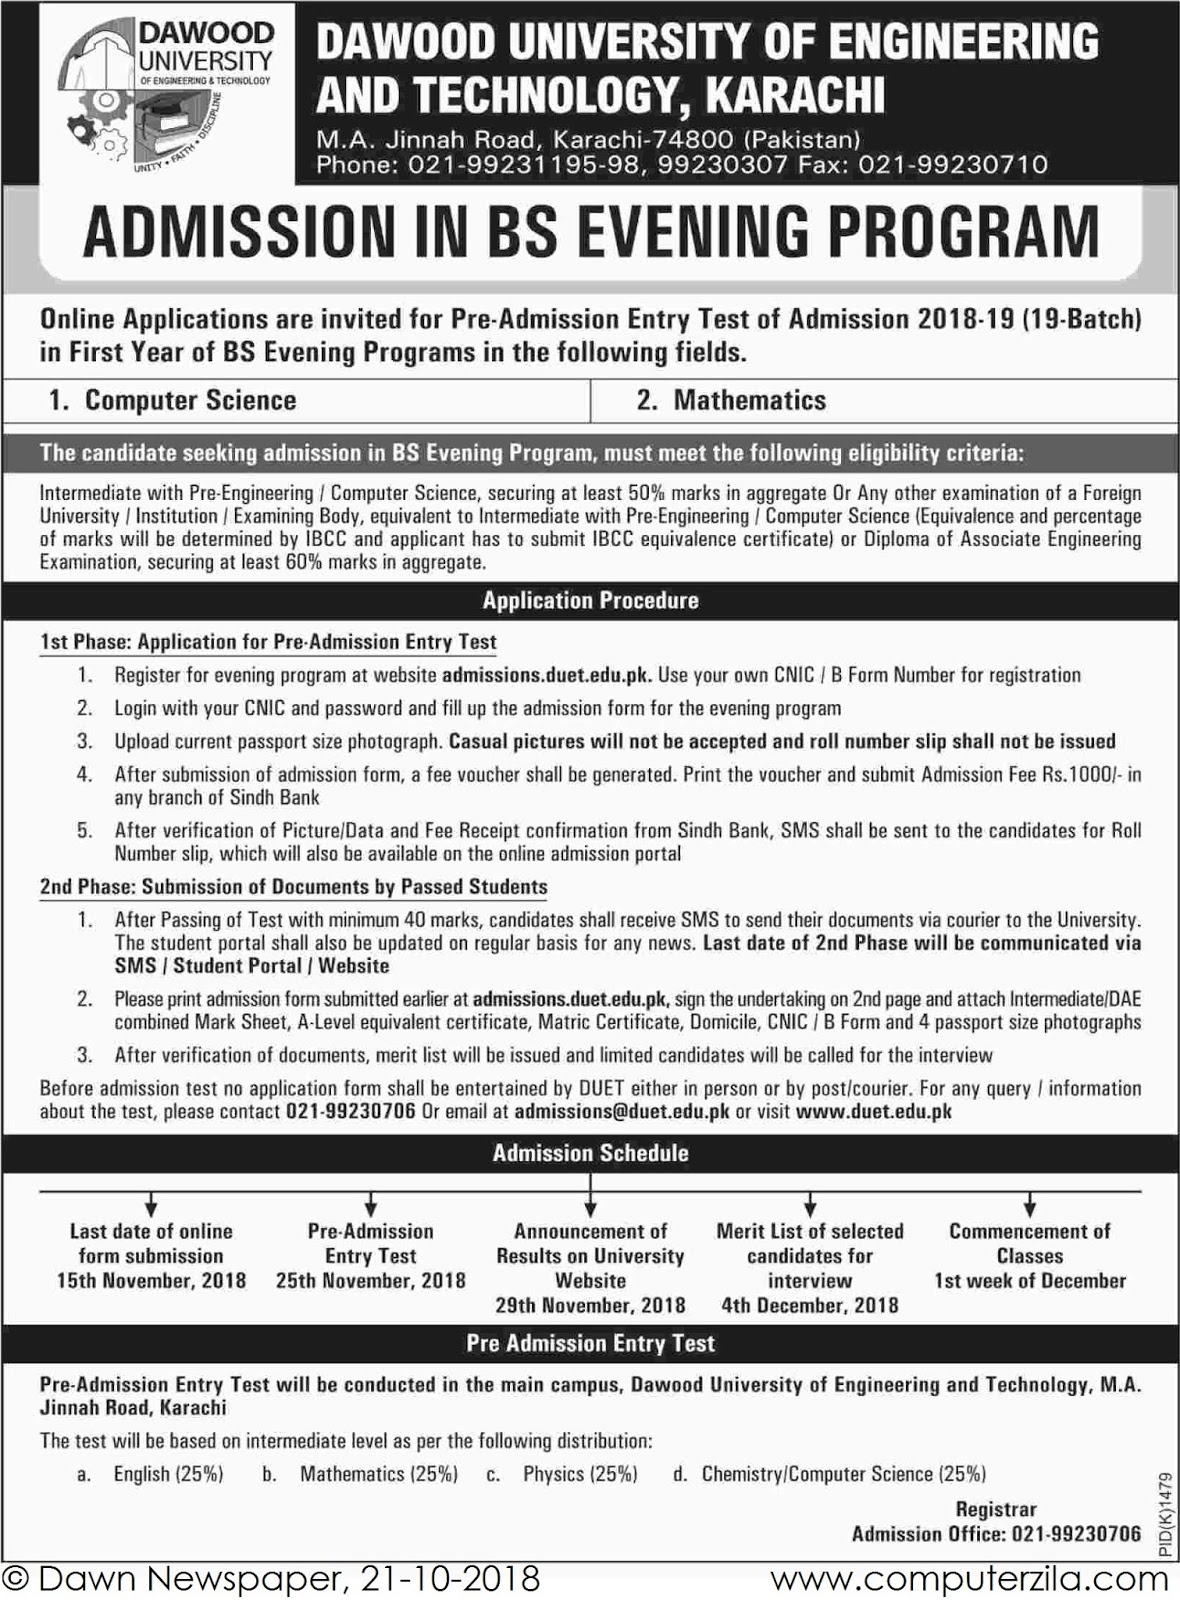 Admissions Open For Fall 2018 At DUET Karachi Campus